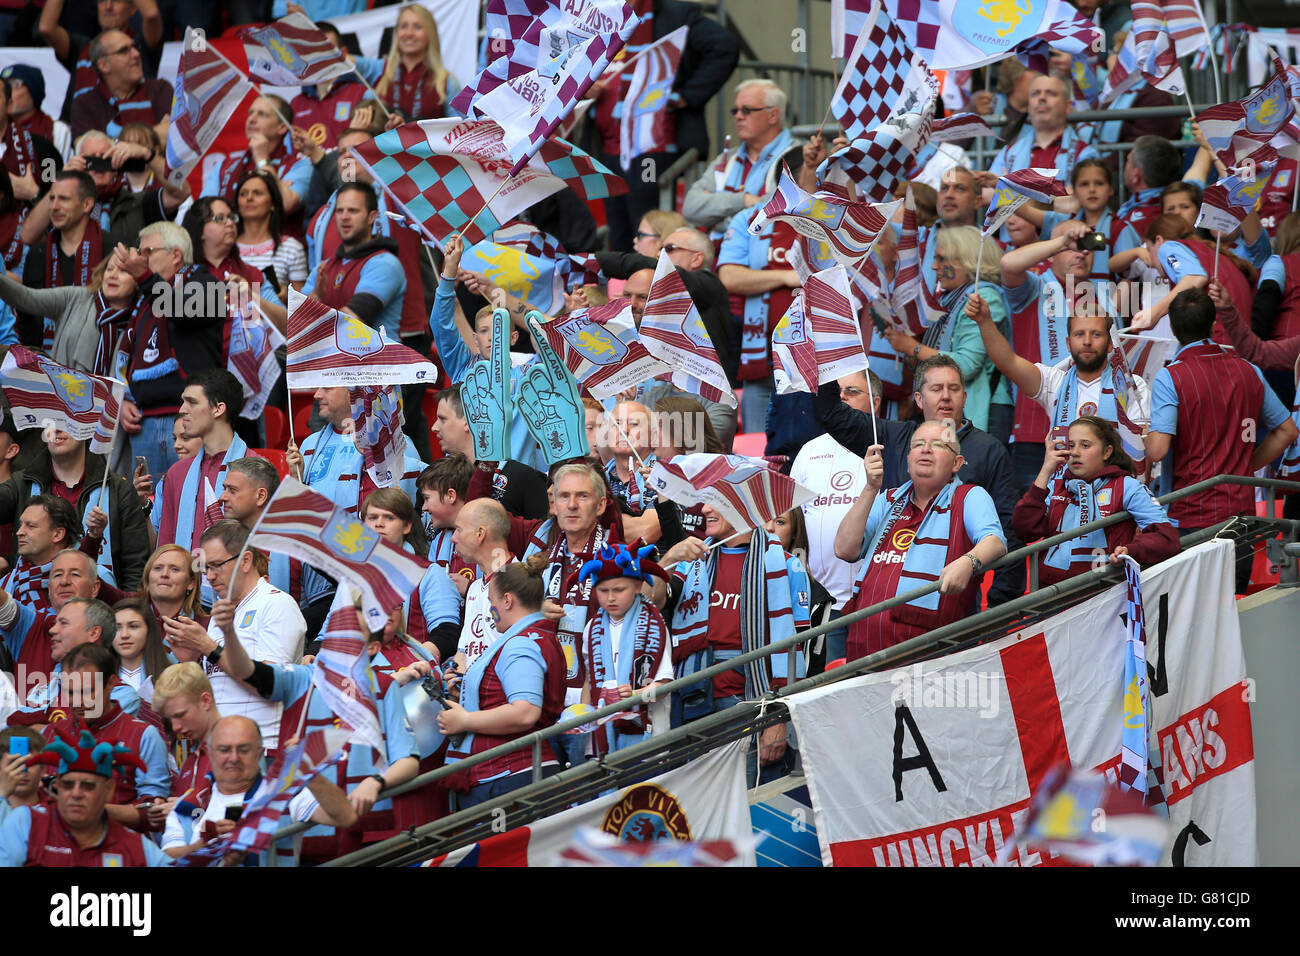 Aston Villa fans show their support in the stands before the FA Cup Final at Wembley Stadium, London. PRESS ASSOCIATION Photo. Picture date: Saturday May 30, 2015. See PA Story SOCCER FA Cup. Photo credit should read: Nick Potts/PA Wire. RESTRICTIONS: Maximum 45 images during a match. No video emulation or promotion as 'live'. No use in games, competitions, merchandise, betting or single club/player services. No use with unofficial audio, video, data, fixture Stock Photo